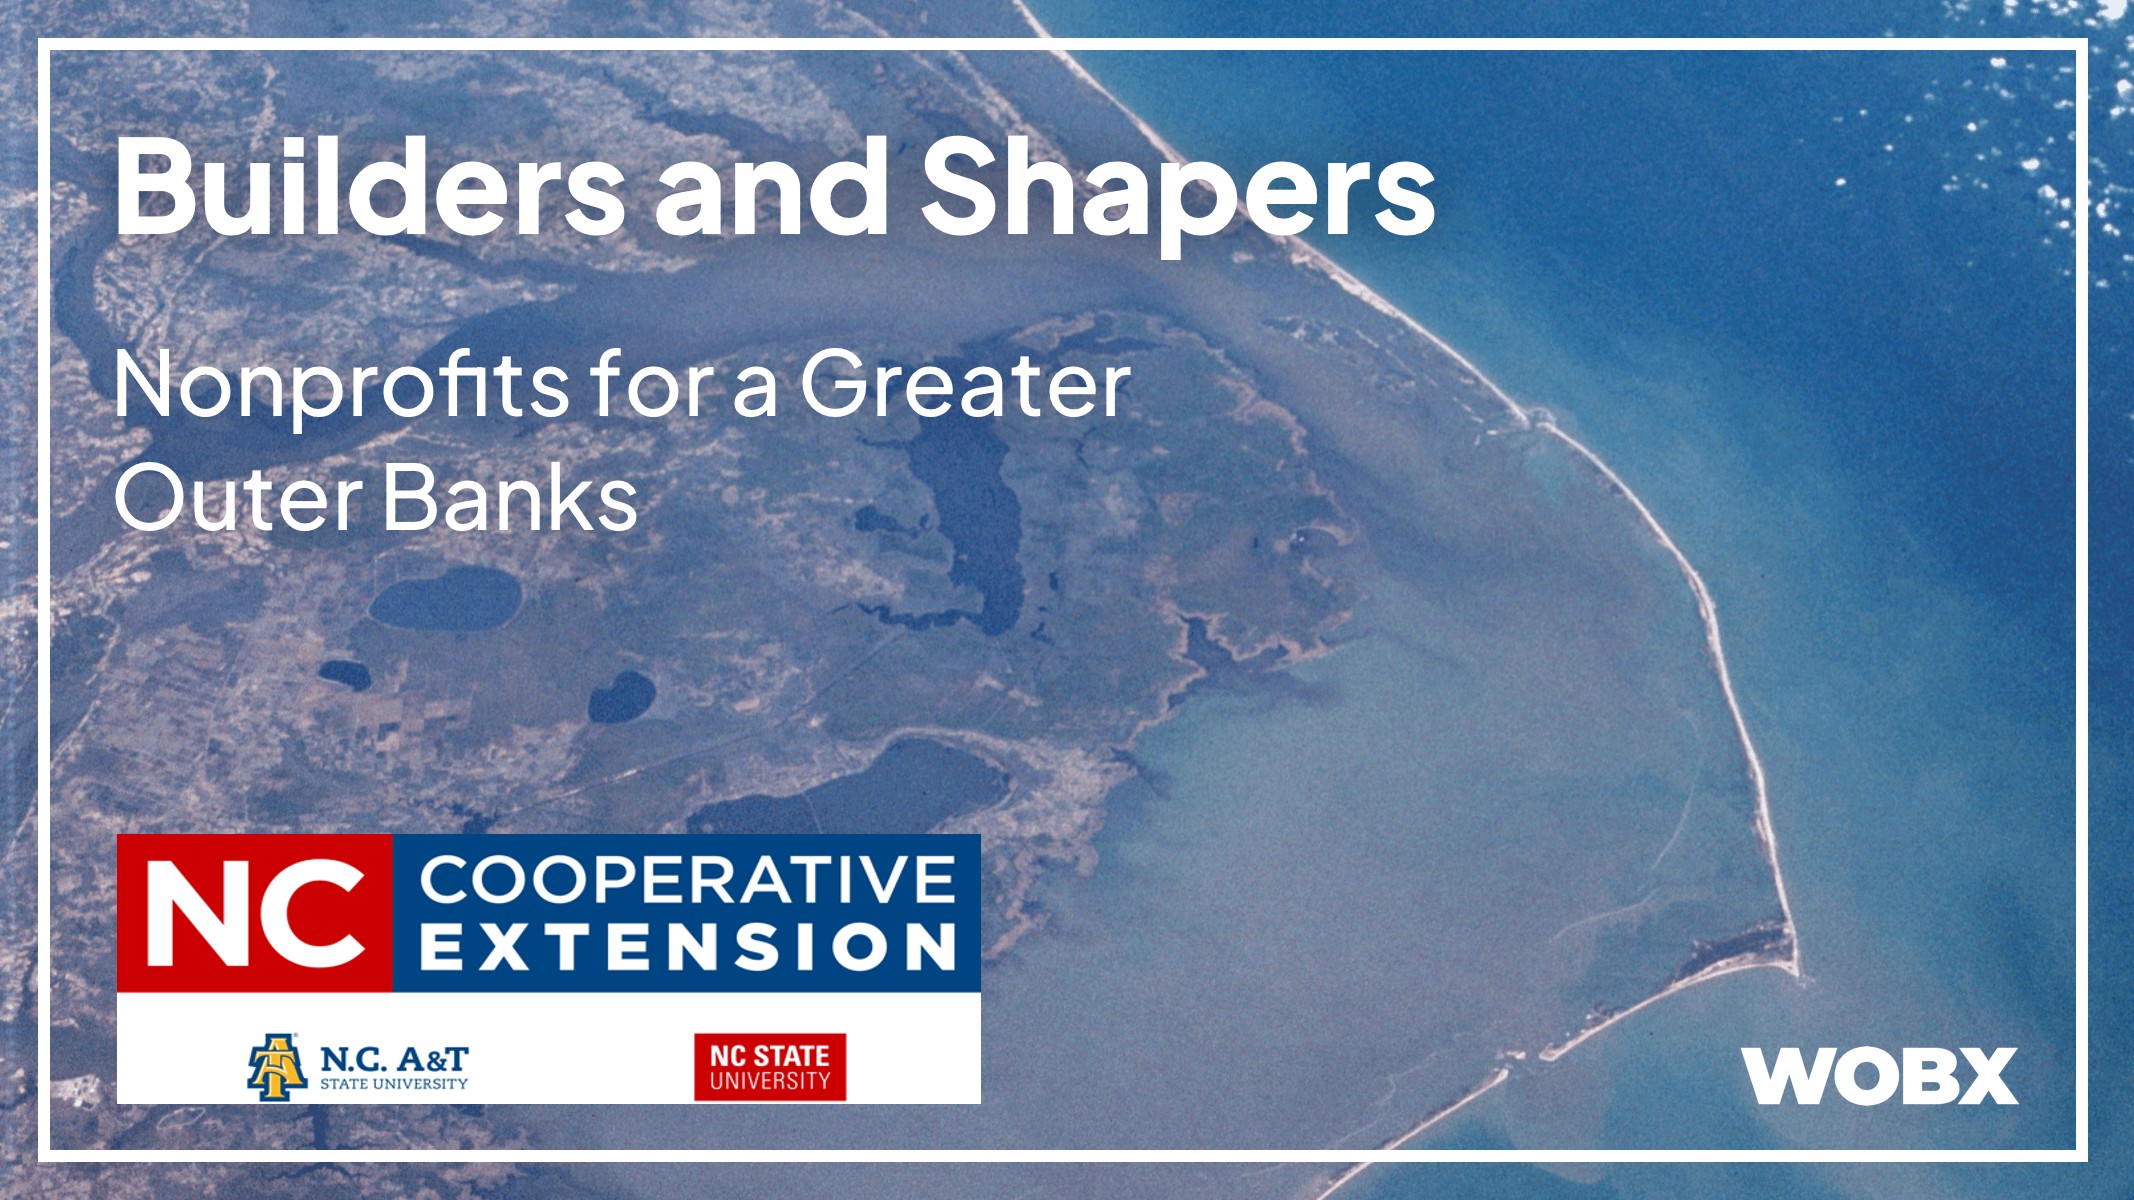 Builders and Shapers: N.C. Cooperative Extension